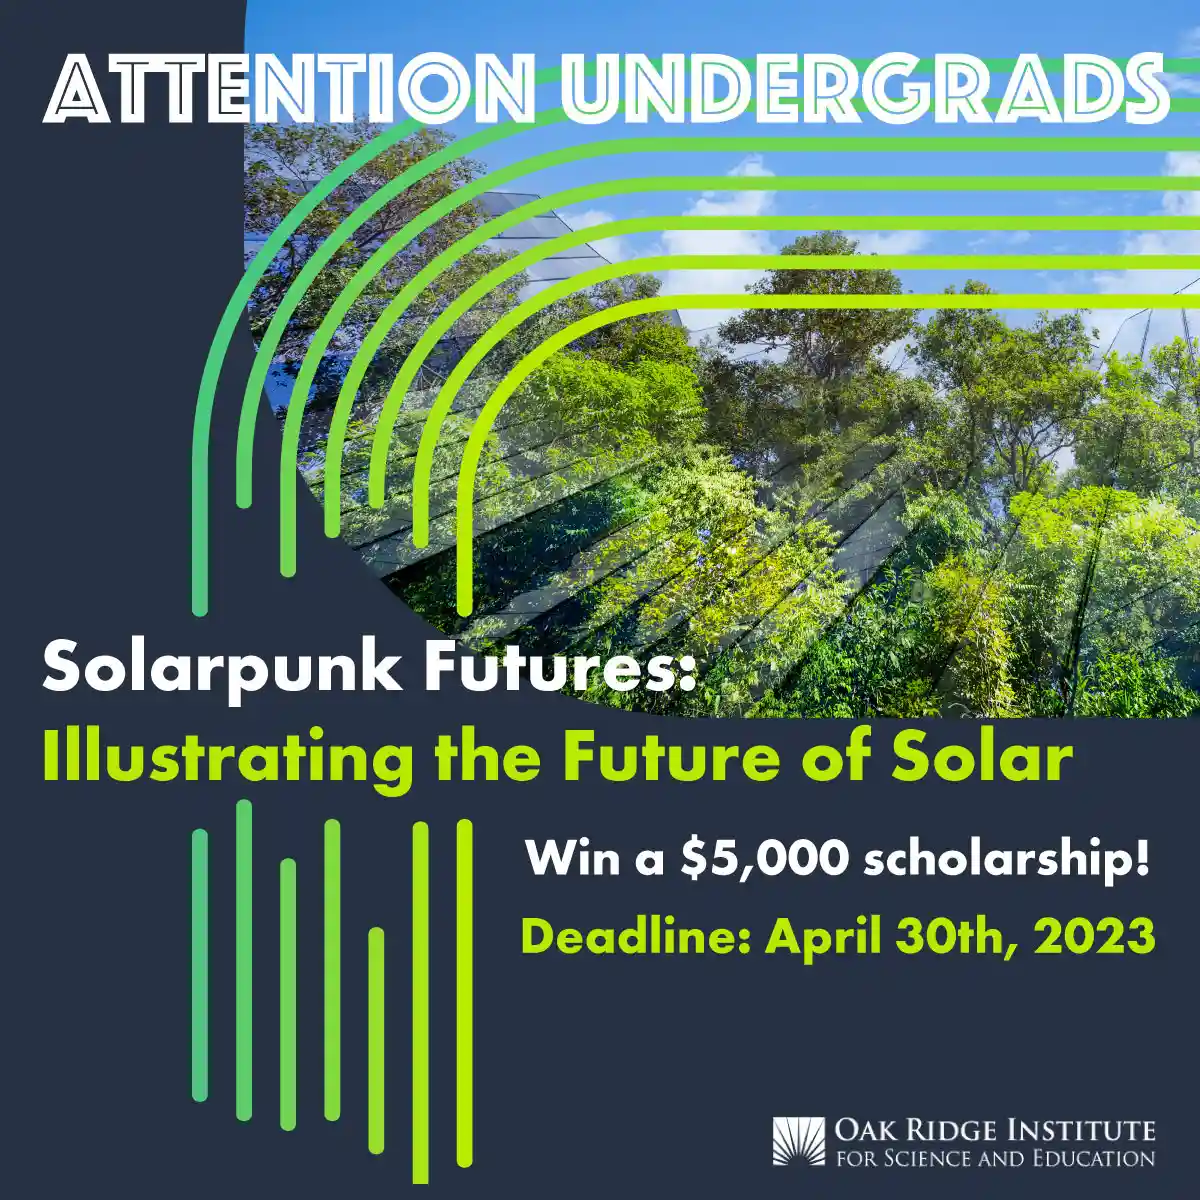 ORISE scholarship competition featuring Solarpunk art movement connects undergrads with DOE’s Solar Energy Technology Office